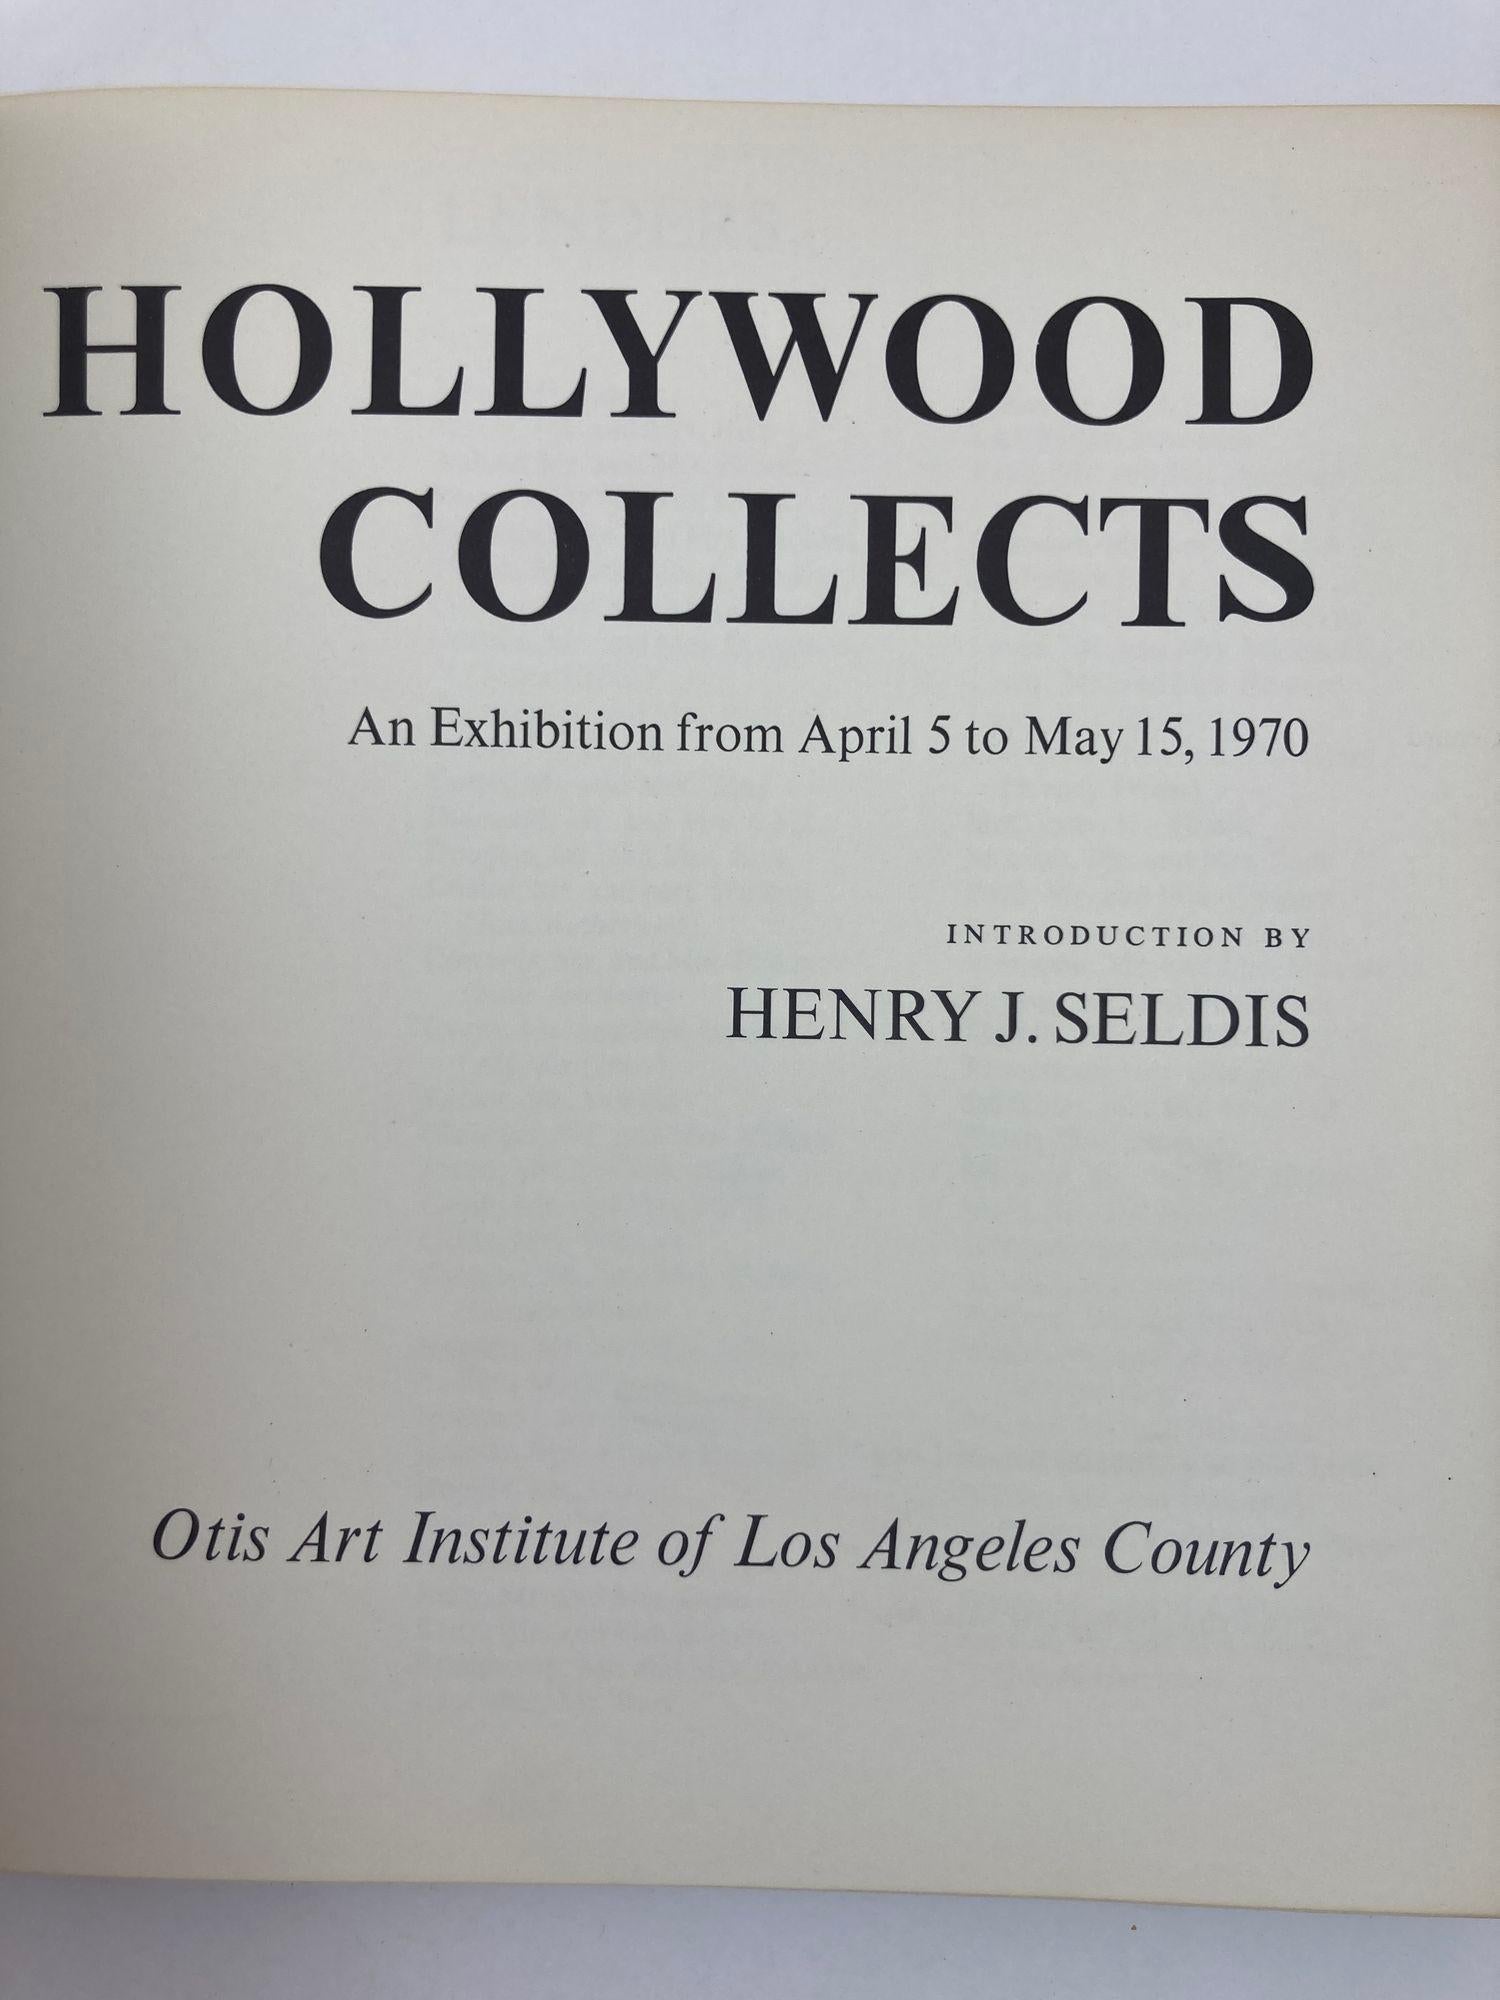 Hollywood Collects An Exhibition from April 5 to May 15 1970 par Seldis Henry J. (editor).
Livre relié.
Los Angeles County Museum of Art, Los Angeles, 1973. Whiting : 